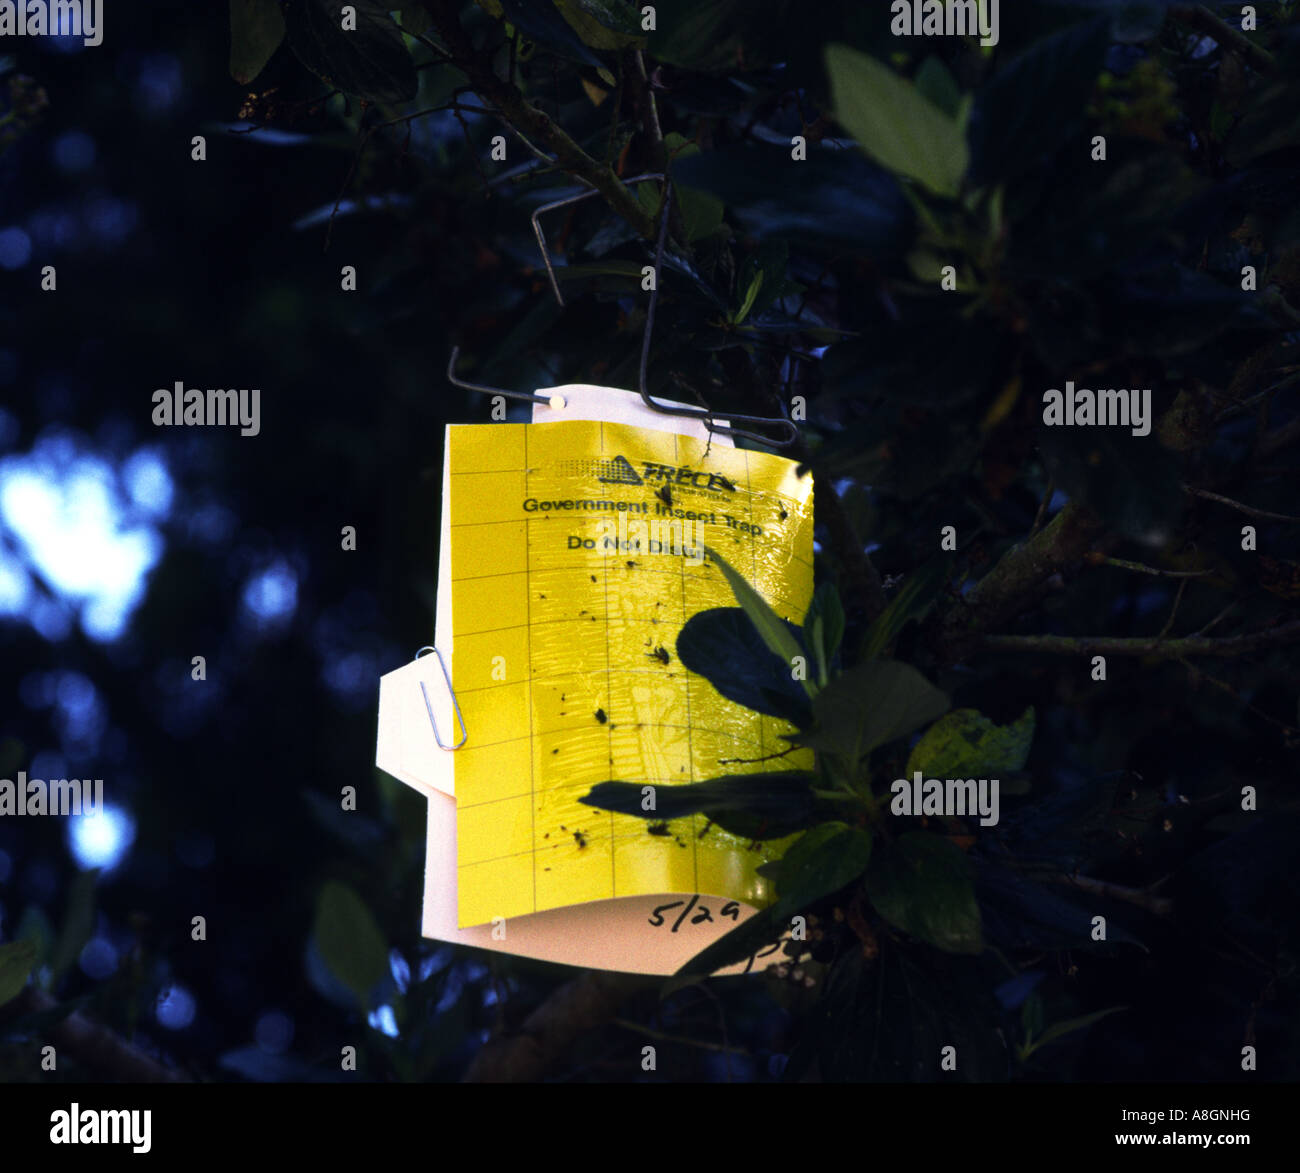 government insect trap hanging on a bushes branch in a city public park Stock Photo